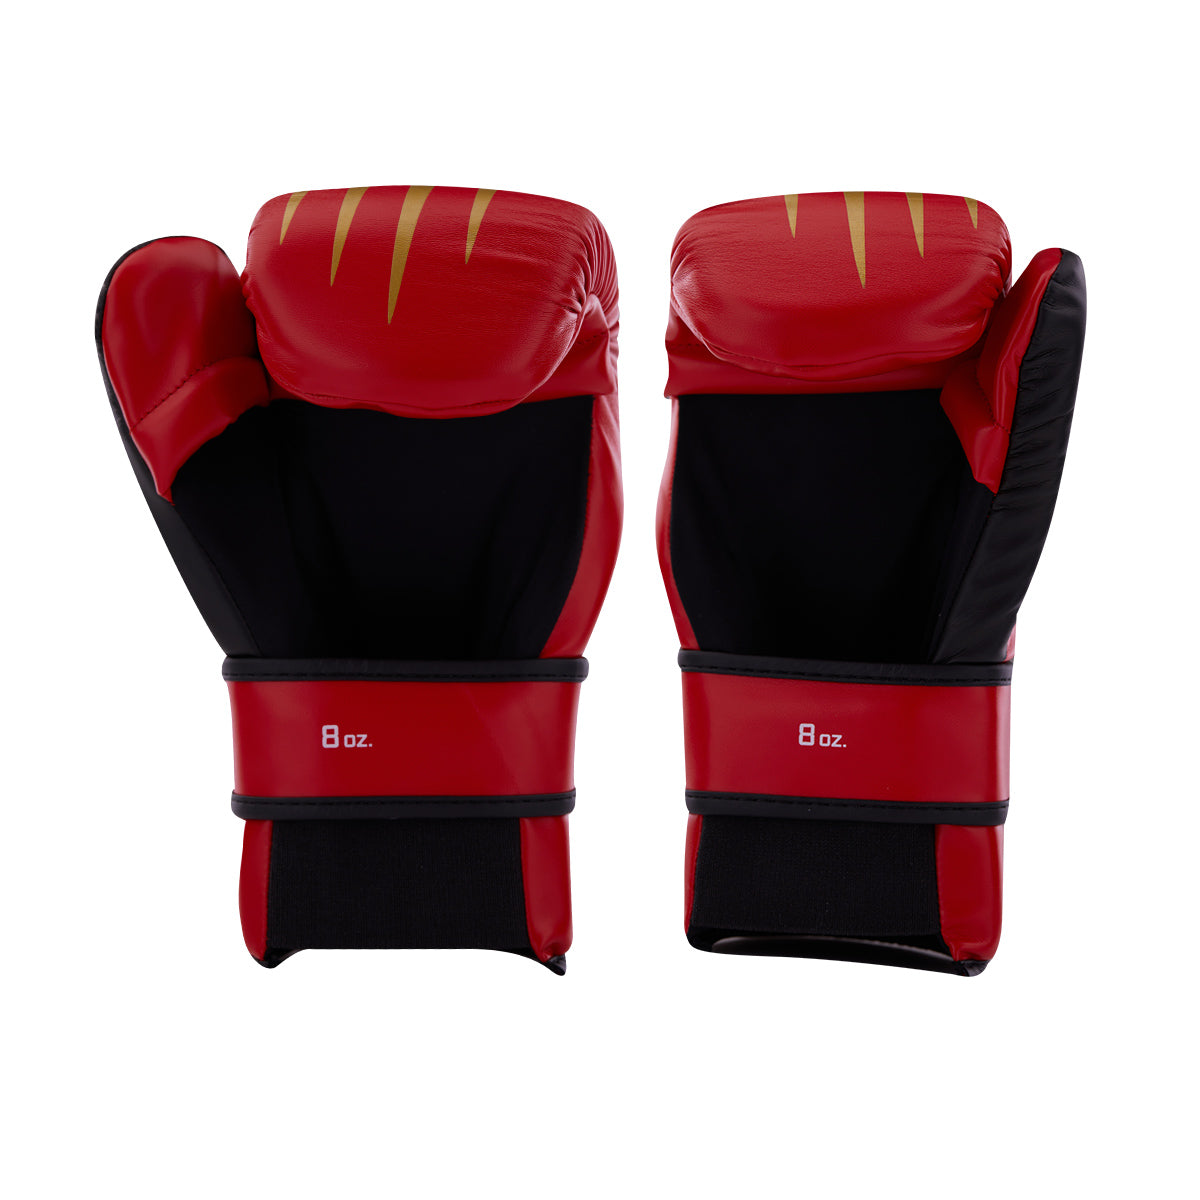 C-Gear Integrity Point Fighting Punches